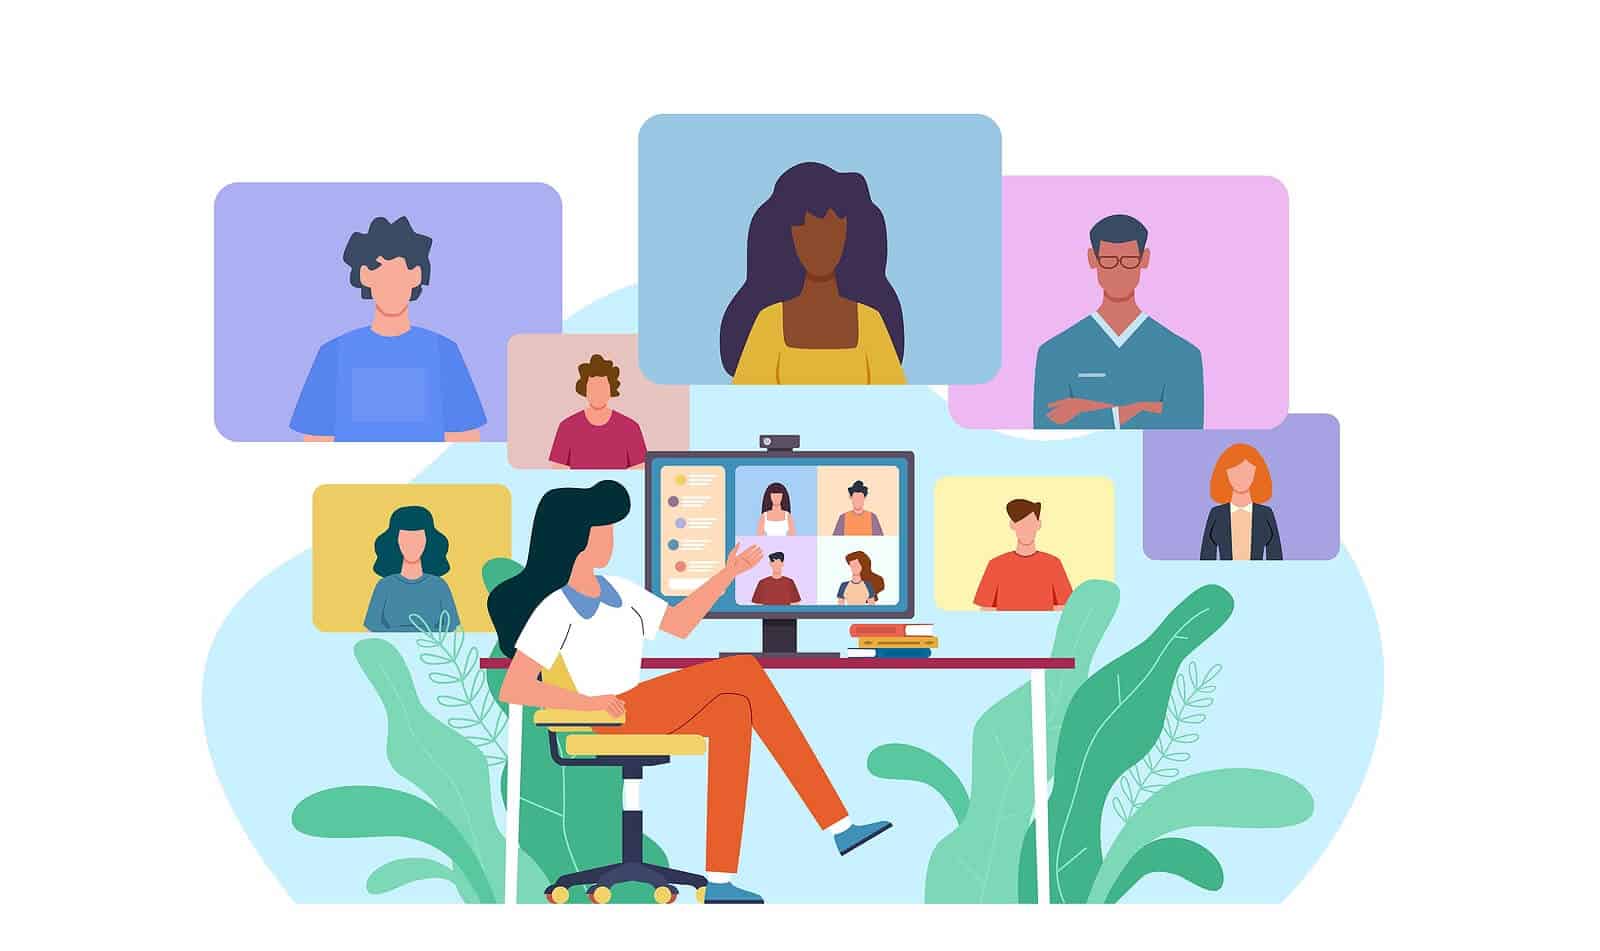 Cartoon picture of a woman speaking to a group of people through the computer. Interested in learning how LinkedIn can boost your SEO? We offer SEO services that can help grow your online presence!